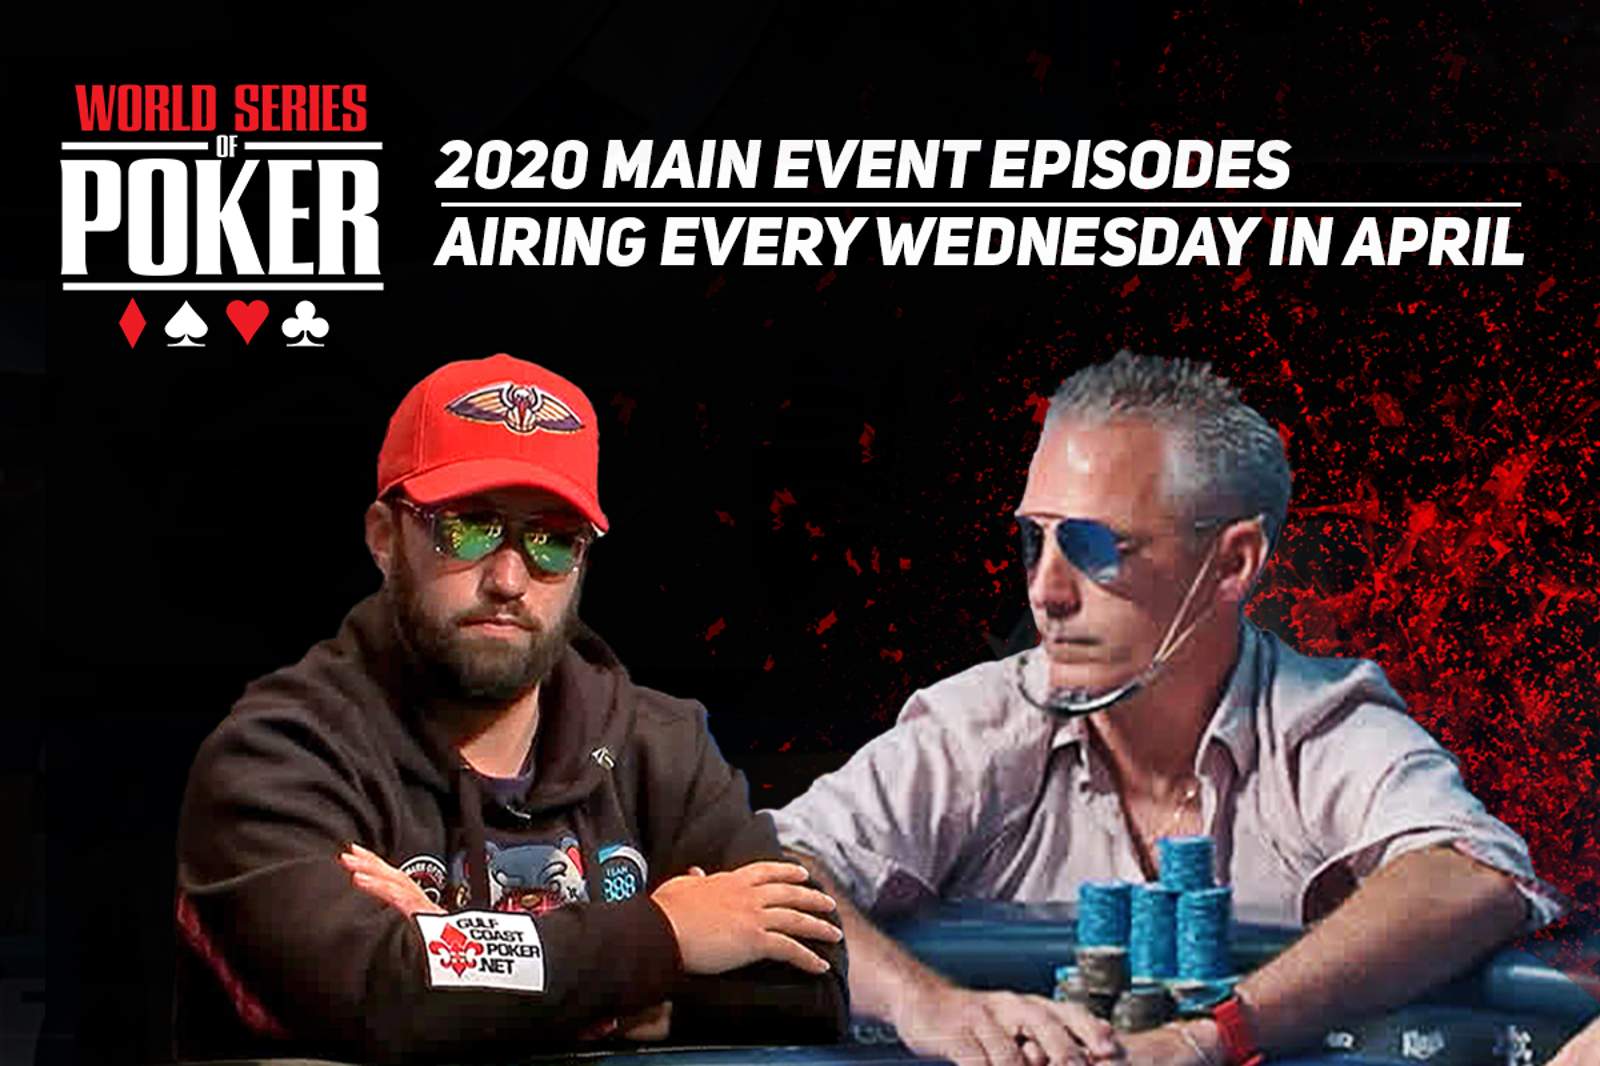 WSOP 2020 Main Event Episodes Now Available on PokerGO